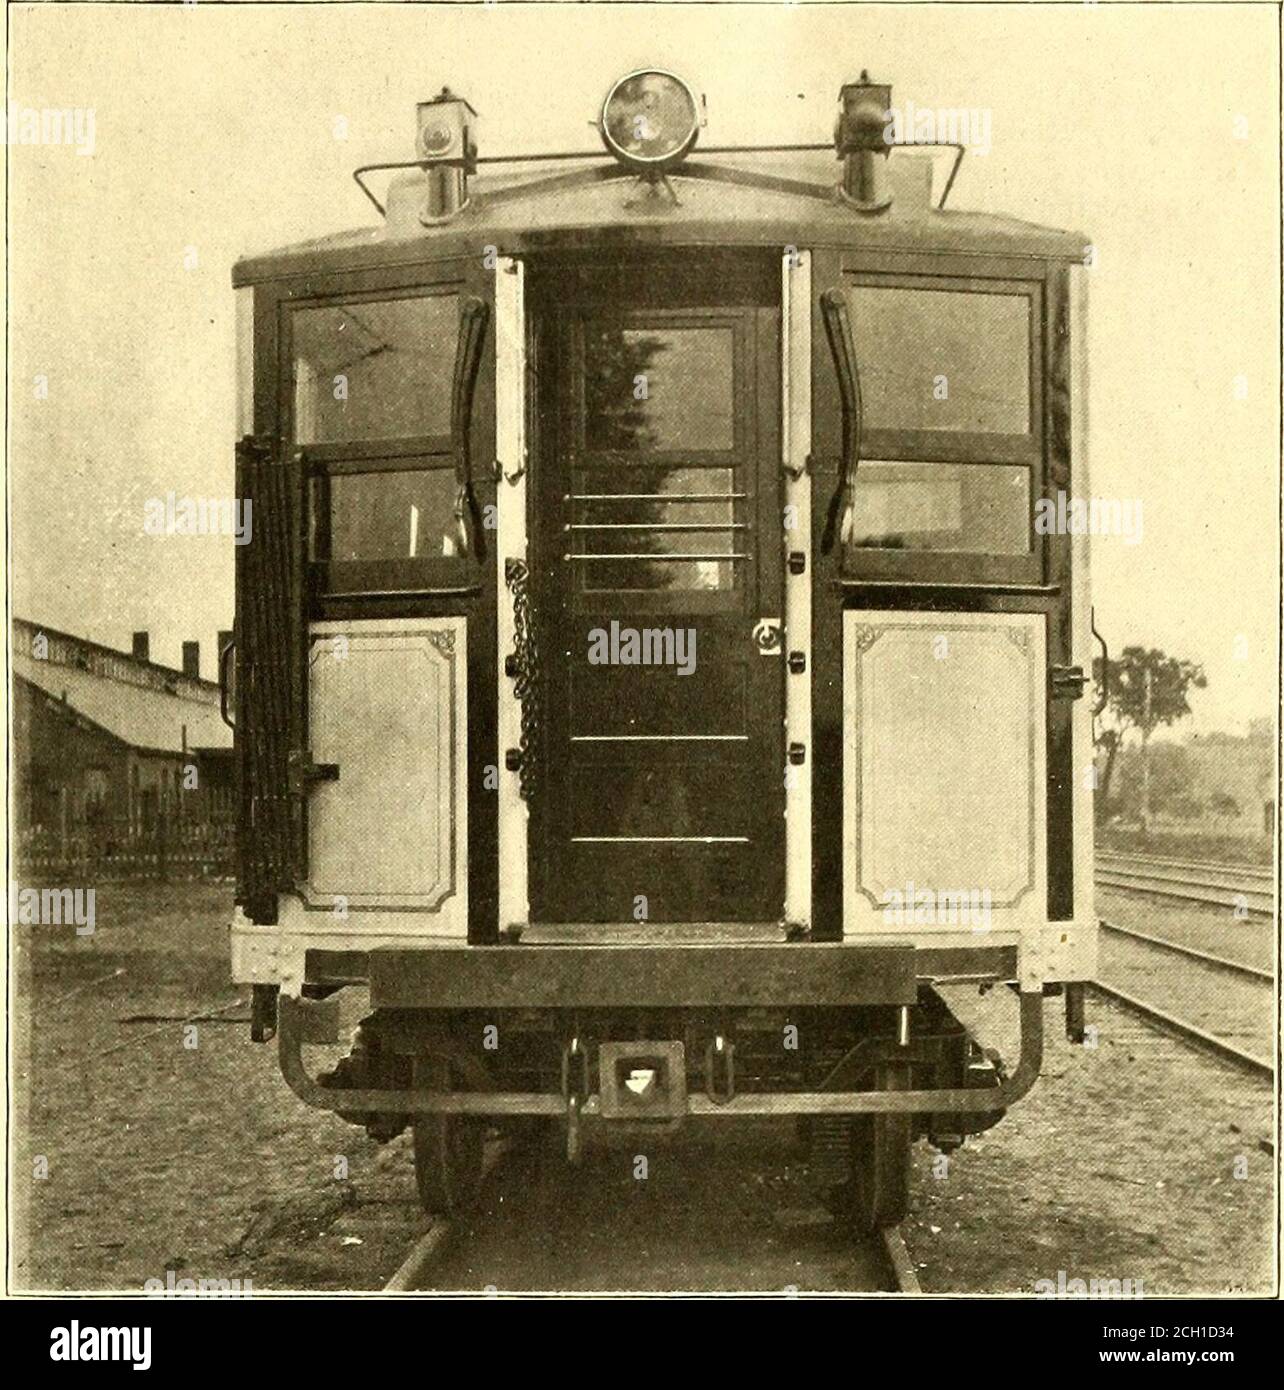 . The Street railway journal . n. 50 1 47 1 42 39 1U 0 33 2 8 11% 8 9 W idth over sheathing S 9% 8 7 Width over deck eaves moulding s 5 8 9% Height, top of rail to center draw-bar. 5 2 5 Height, top of rail to under sills iy8 3% Height, top of rail over platform S 9 Height, top of rail over roof 12 0 12 IOV2 Probably the most important departure from or-dinary practice in the general design of these carsis the arrangement of the platforms. The cars arevestibuled, and when made up into trains each carcan be closed so as to be entirely distinct or apassageway may be opened throughout the train.A Stock Photo